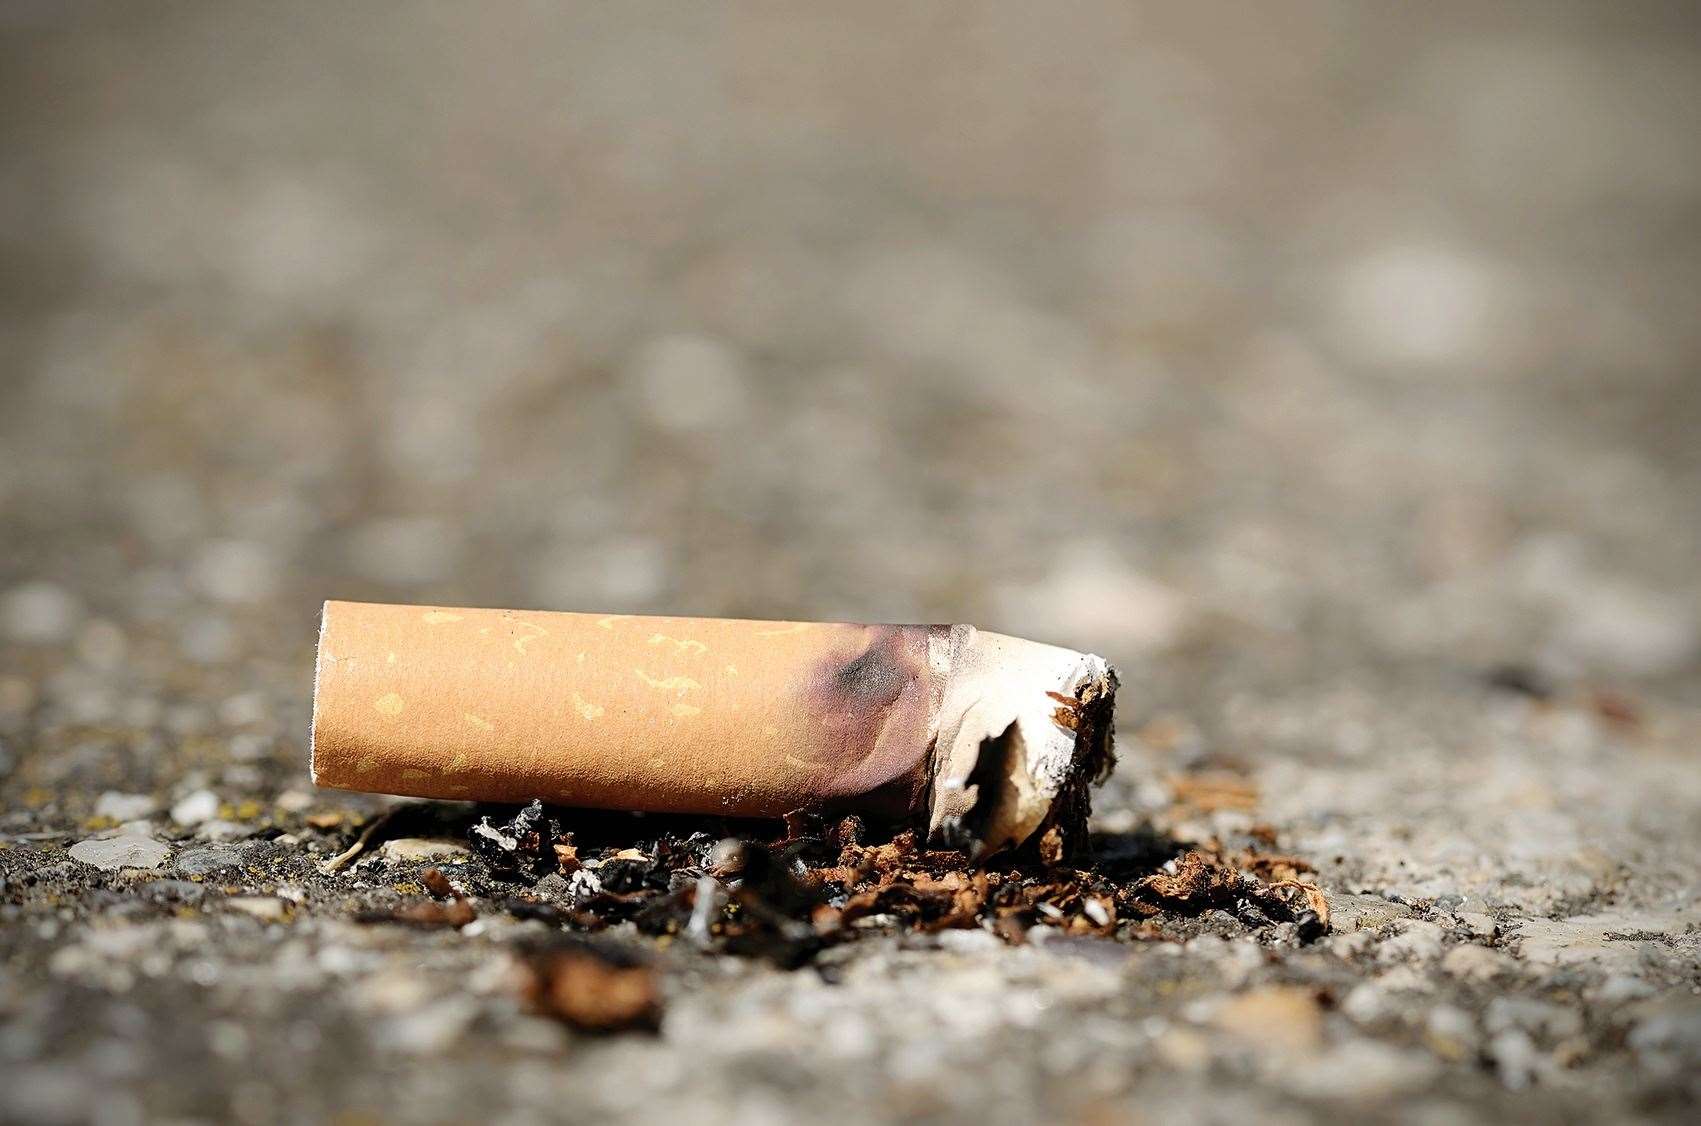 A total of 15 people have been ordered to pay fines totalling £9k for dropped cigarette butts. Photo: istock